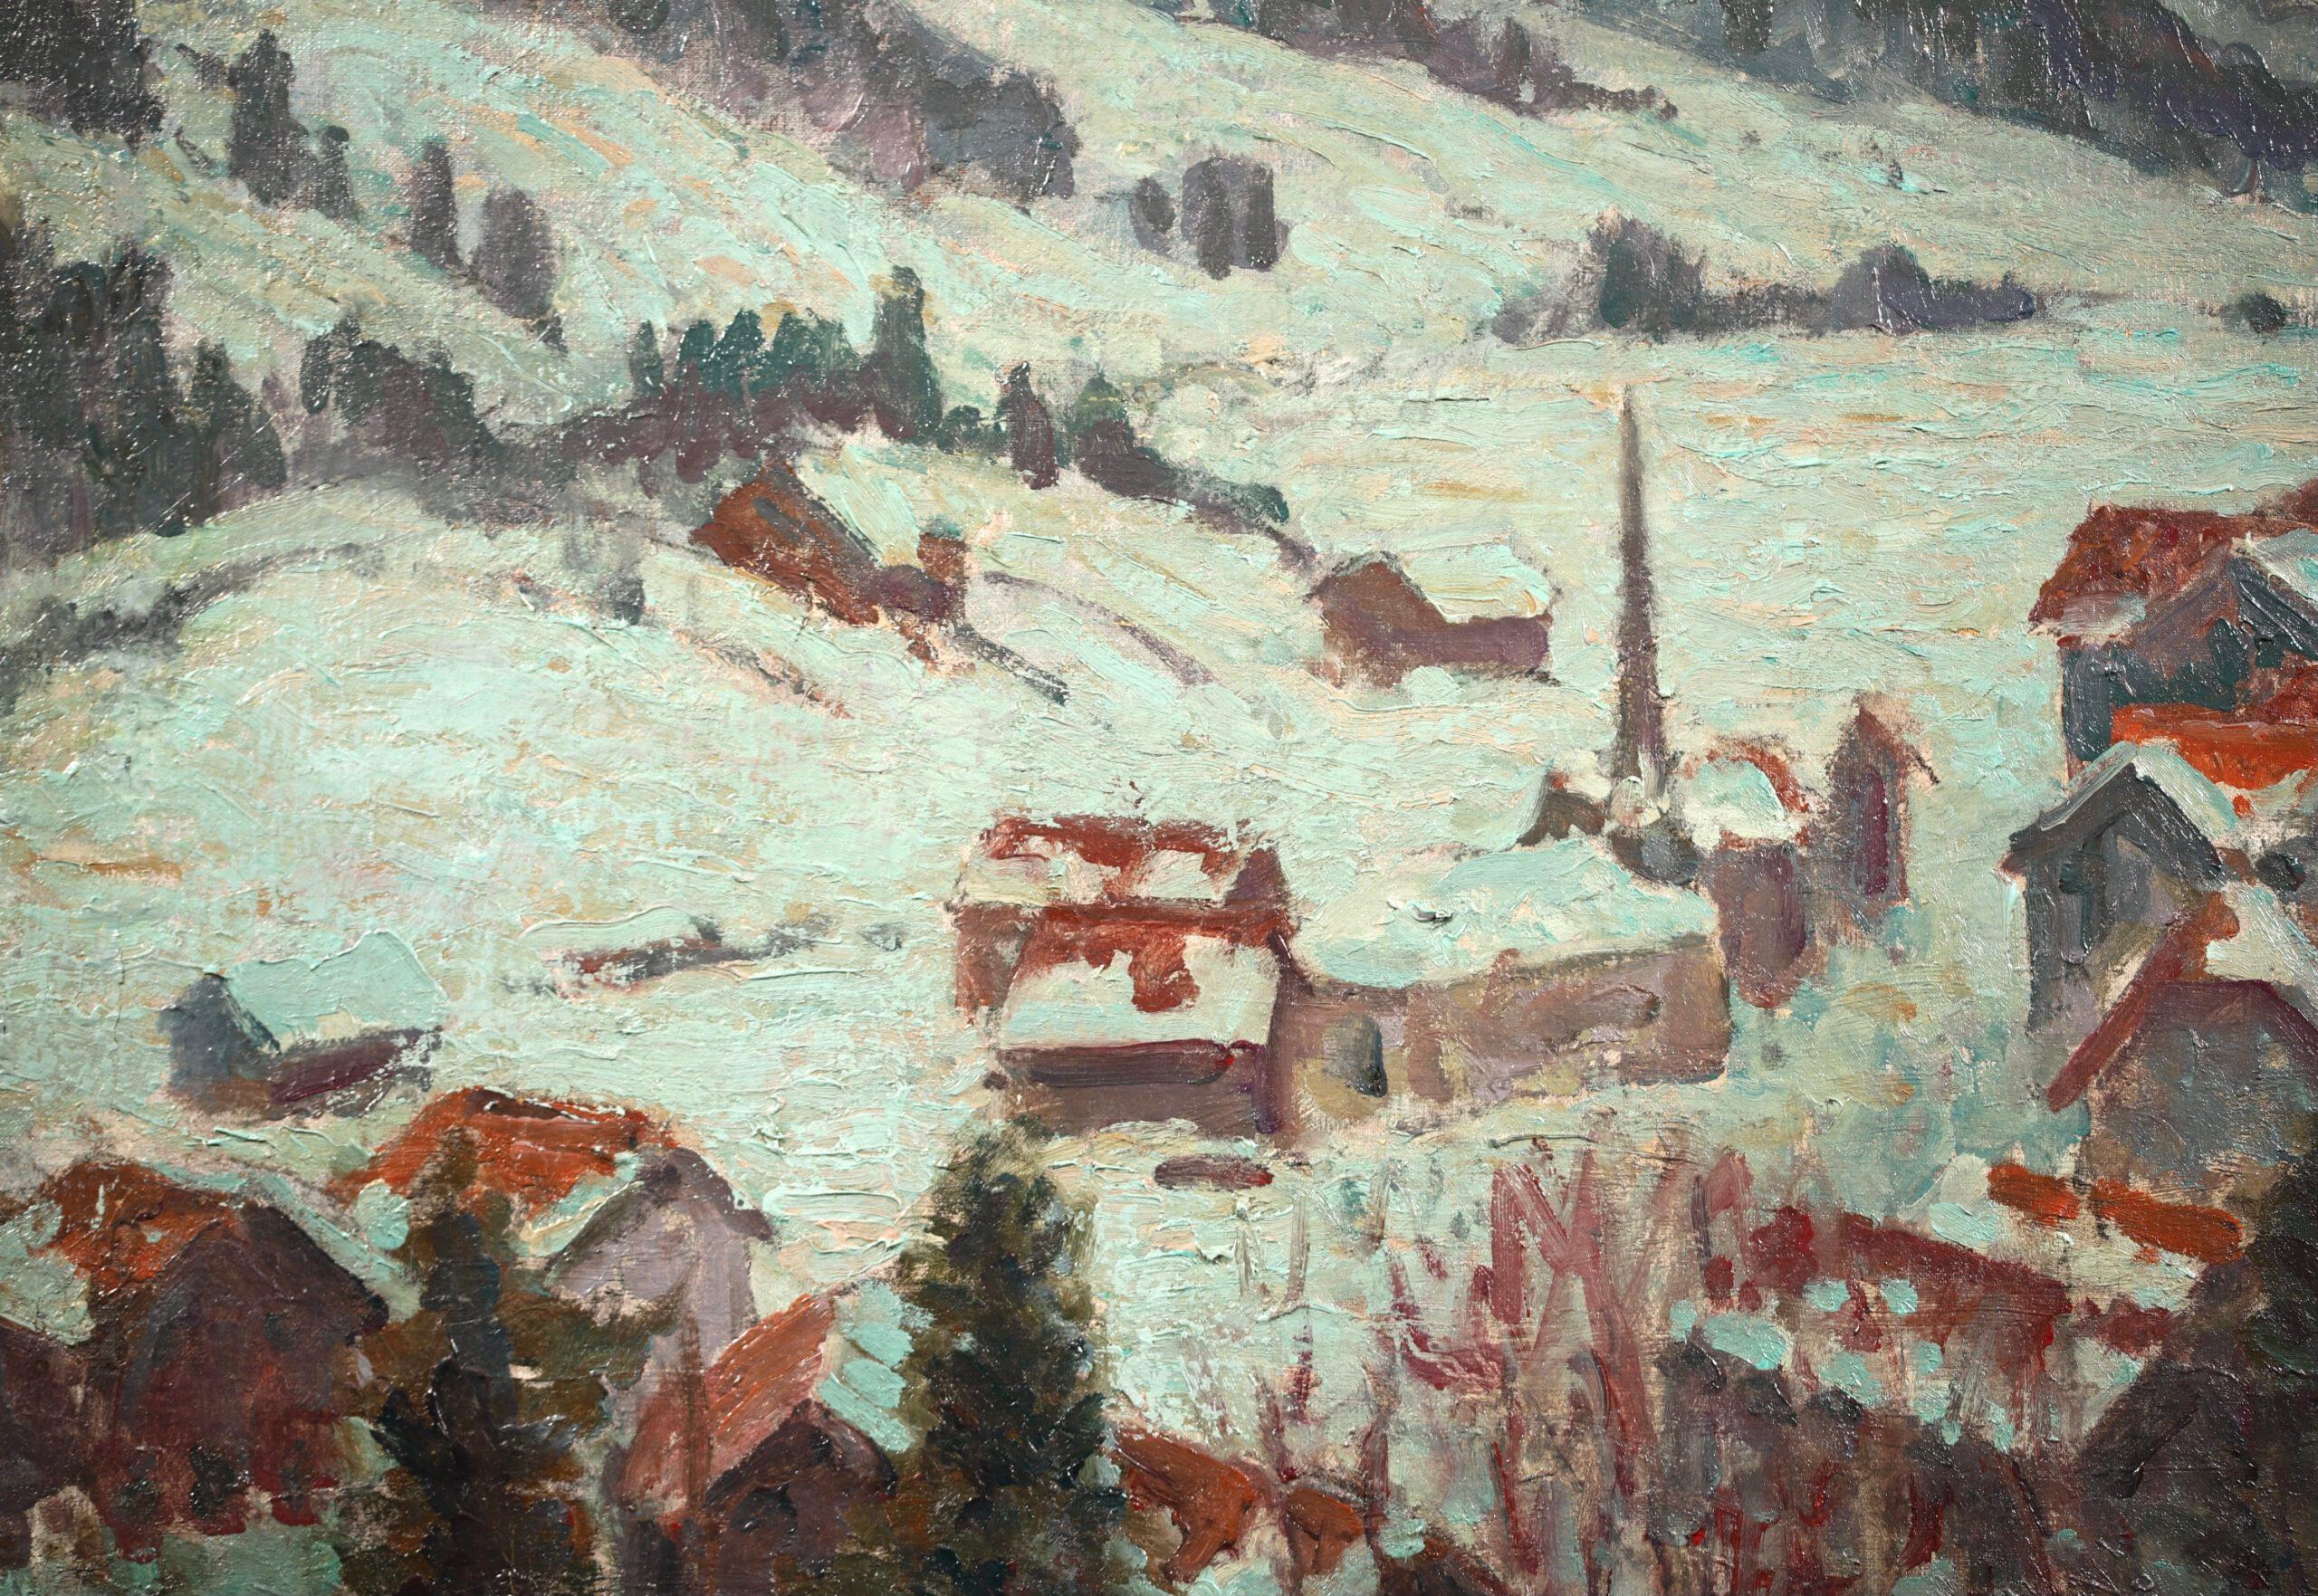 Winter Snow - Gstaad - Impressionist Landscape Oil by William Samuel Horton For Sale 5